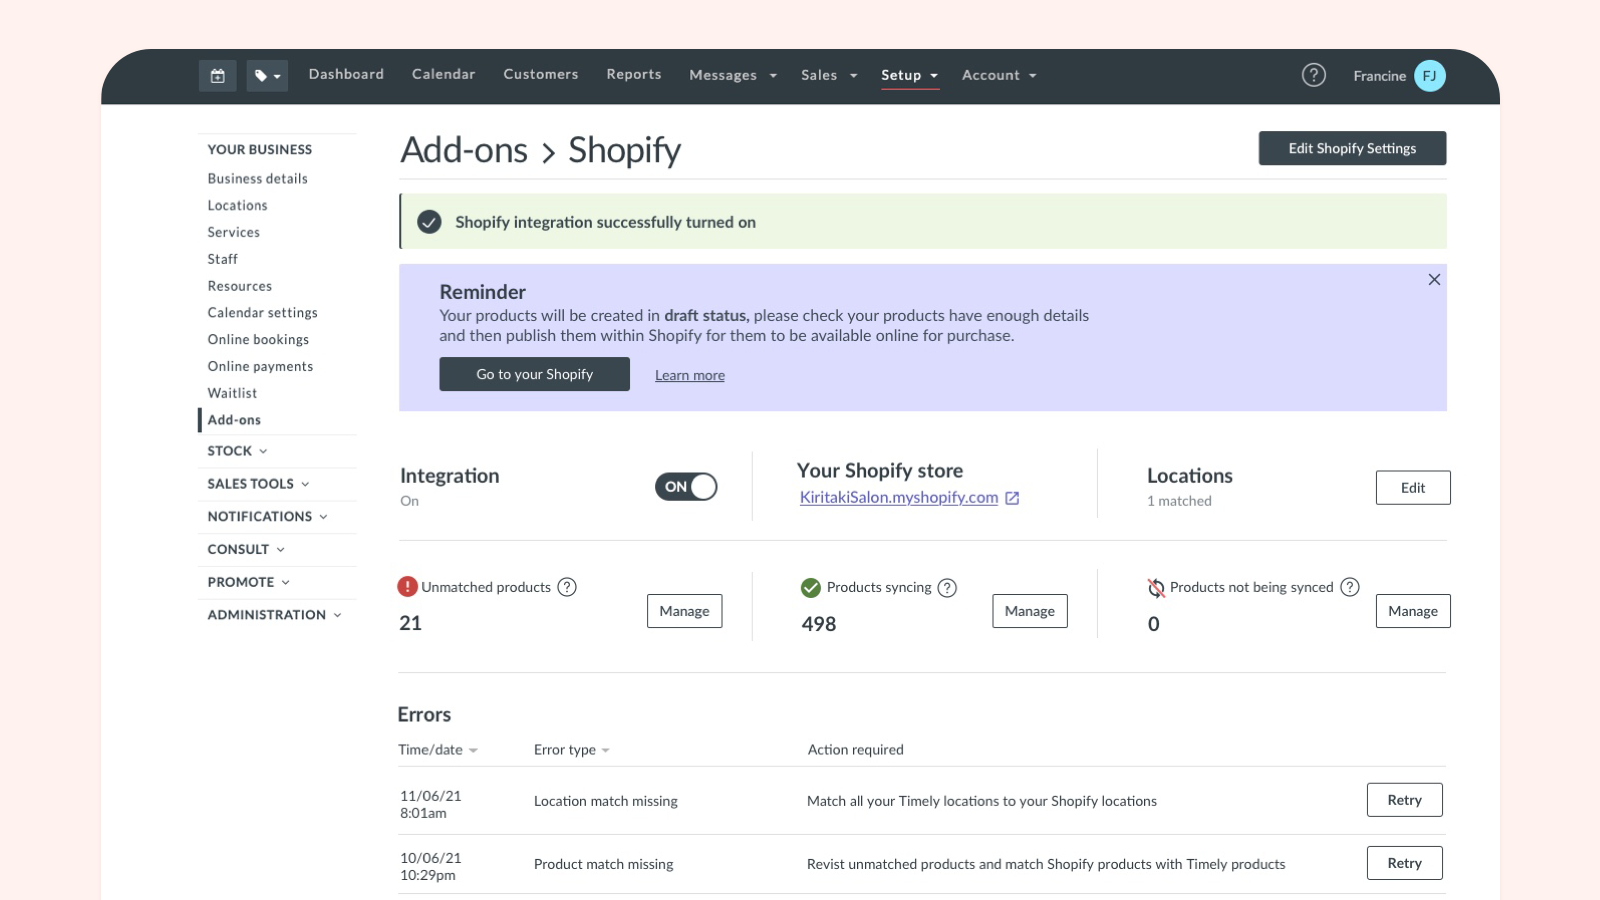 See the status of your integration with Shopify